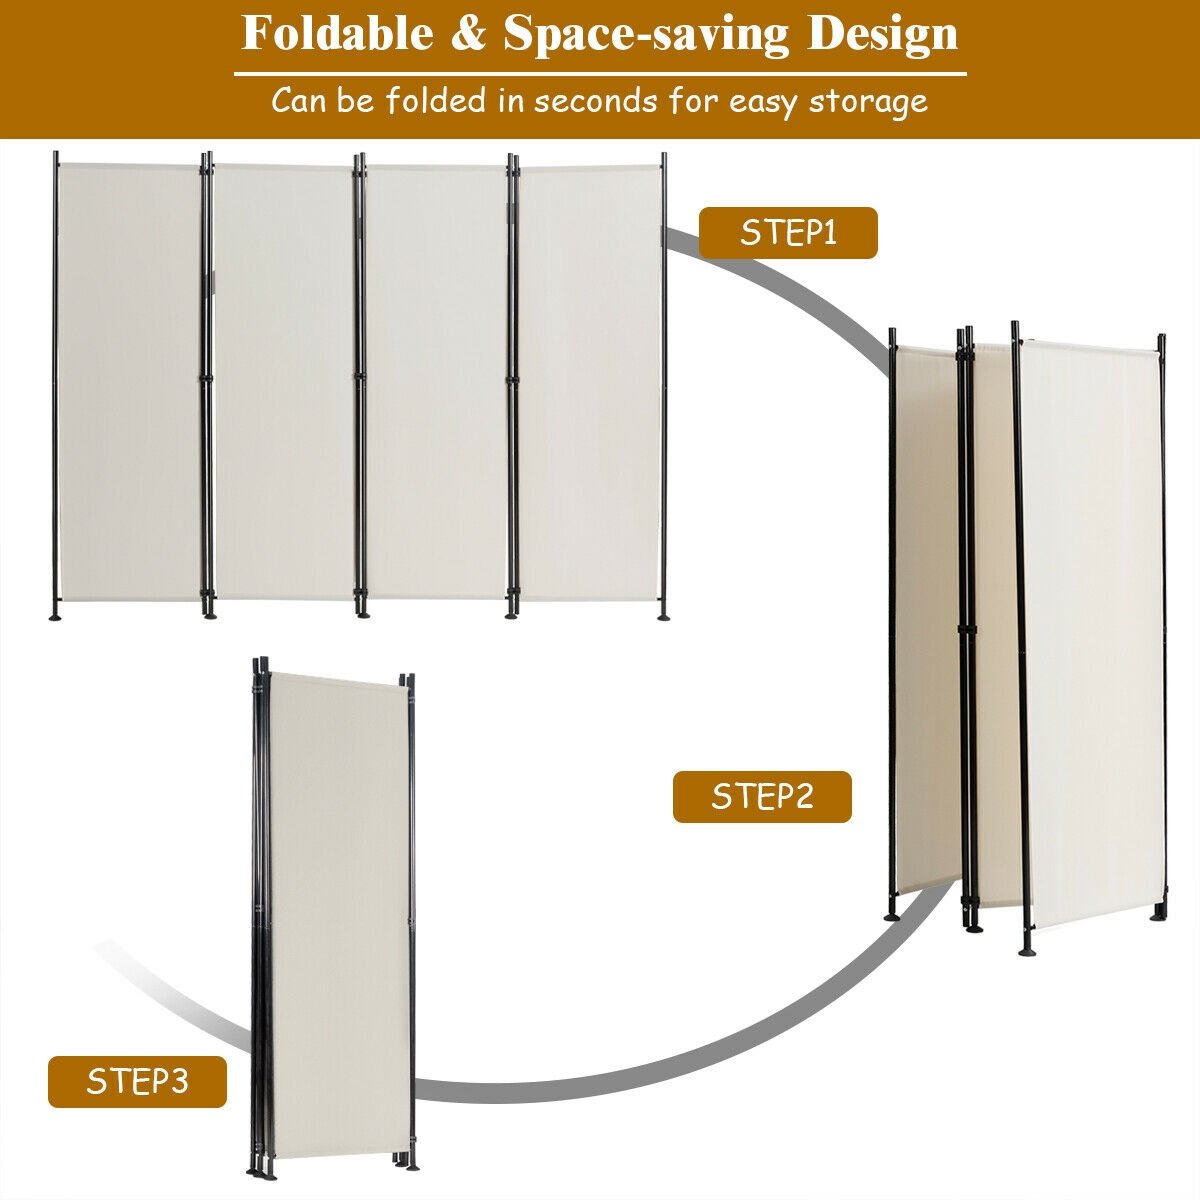 4-Panel Room Divider Folding Privacy Screen, Beige